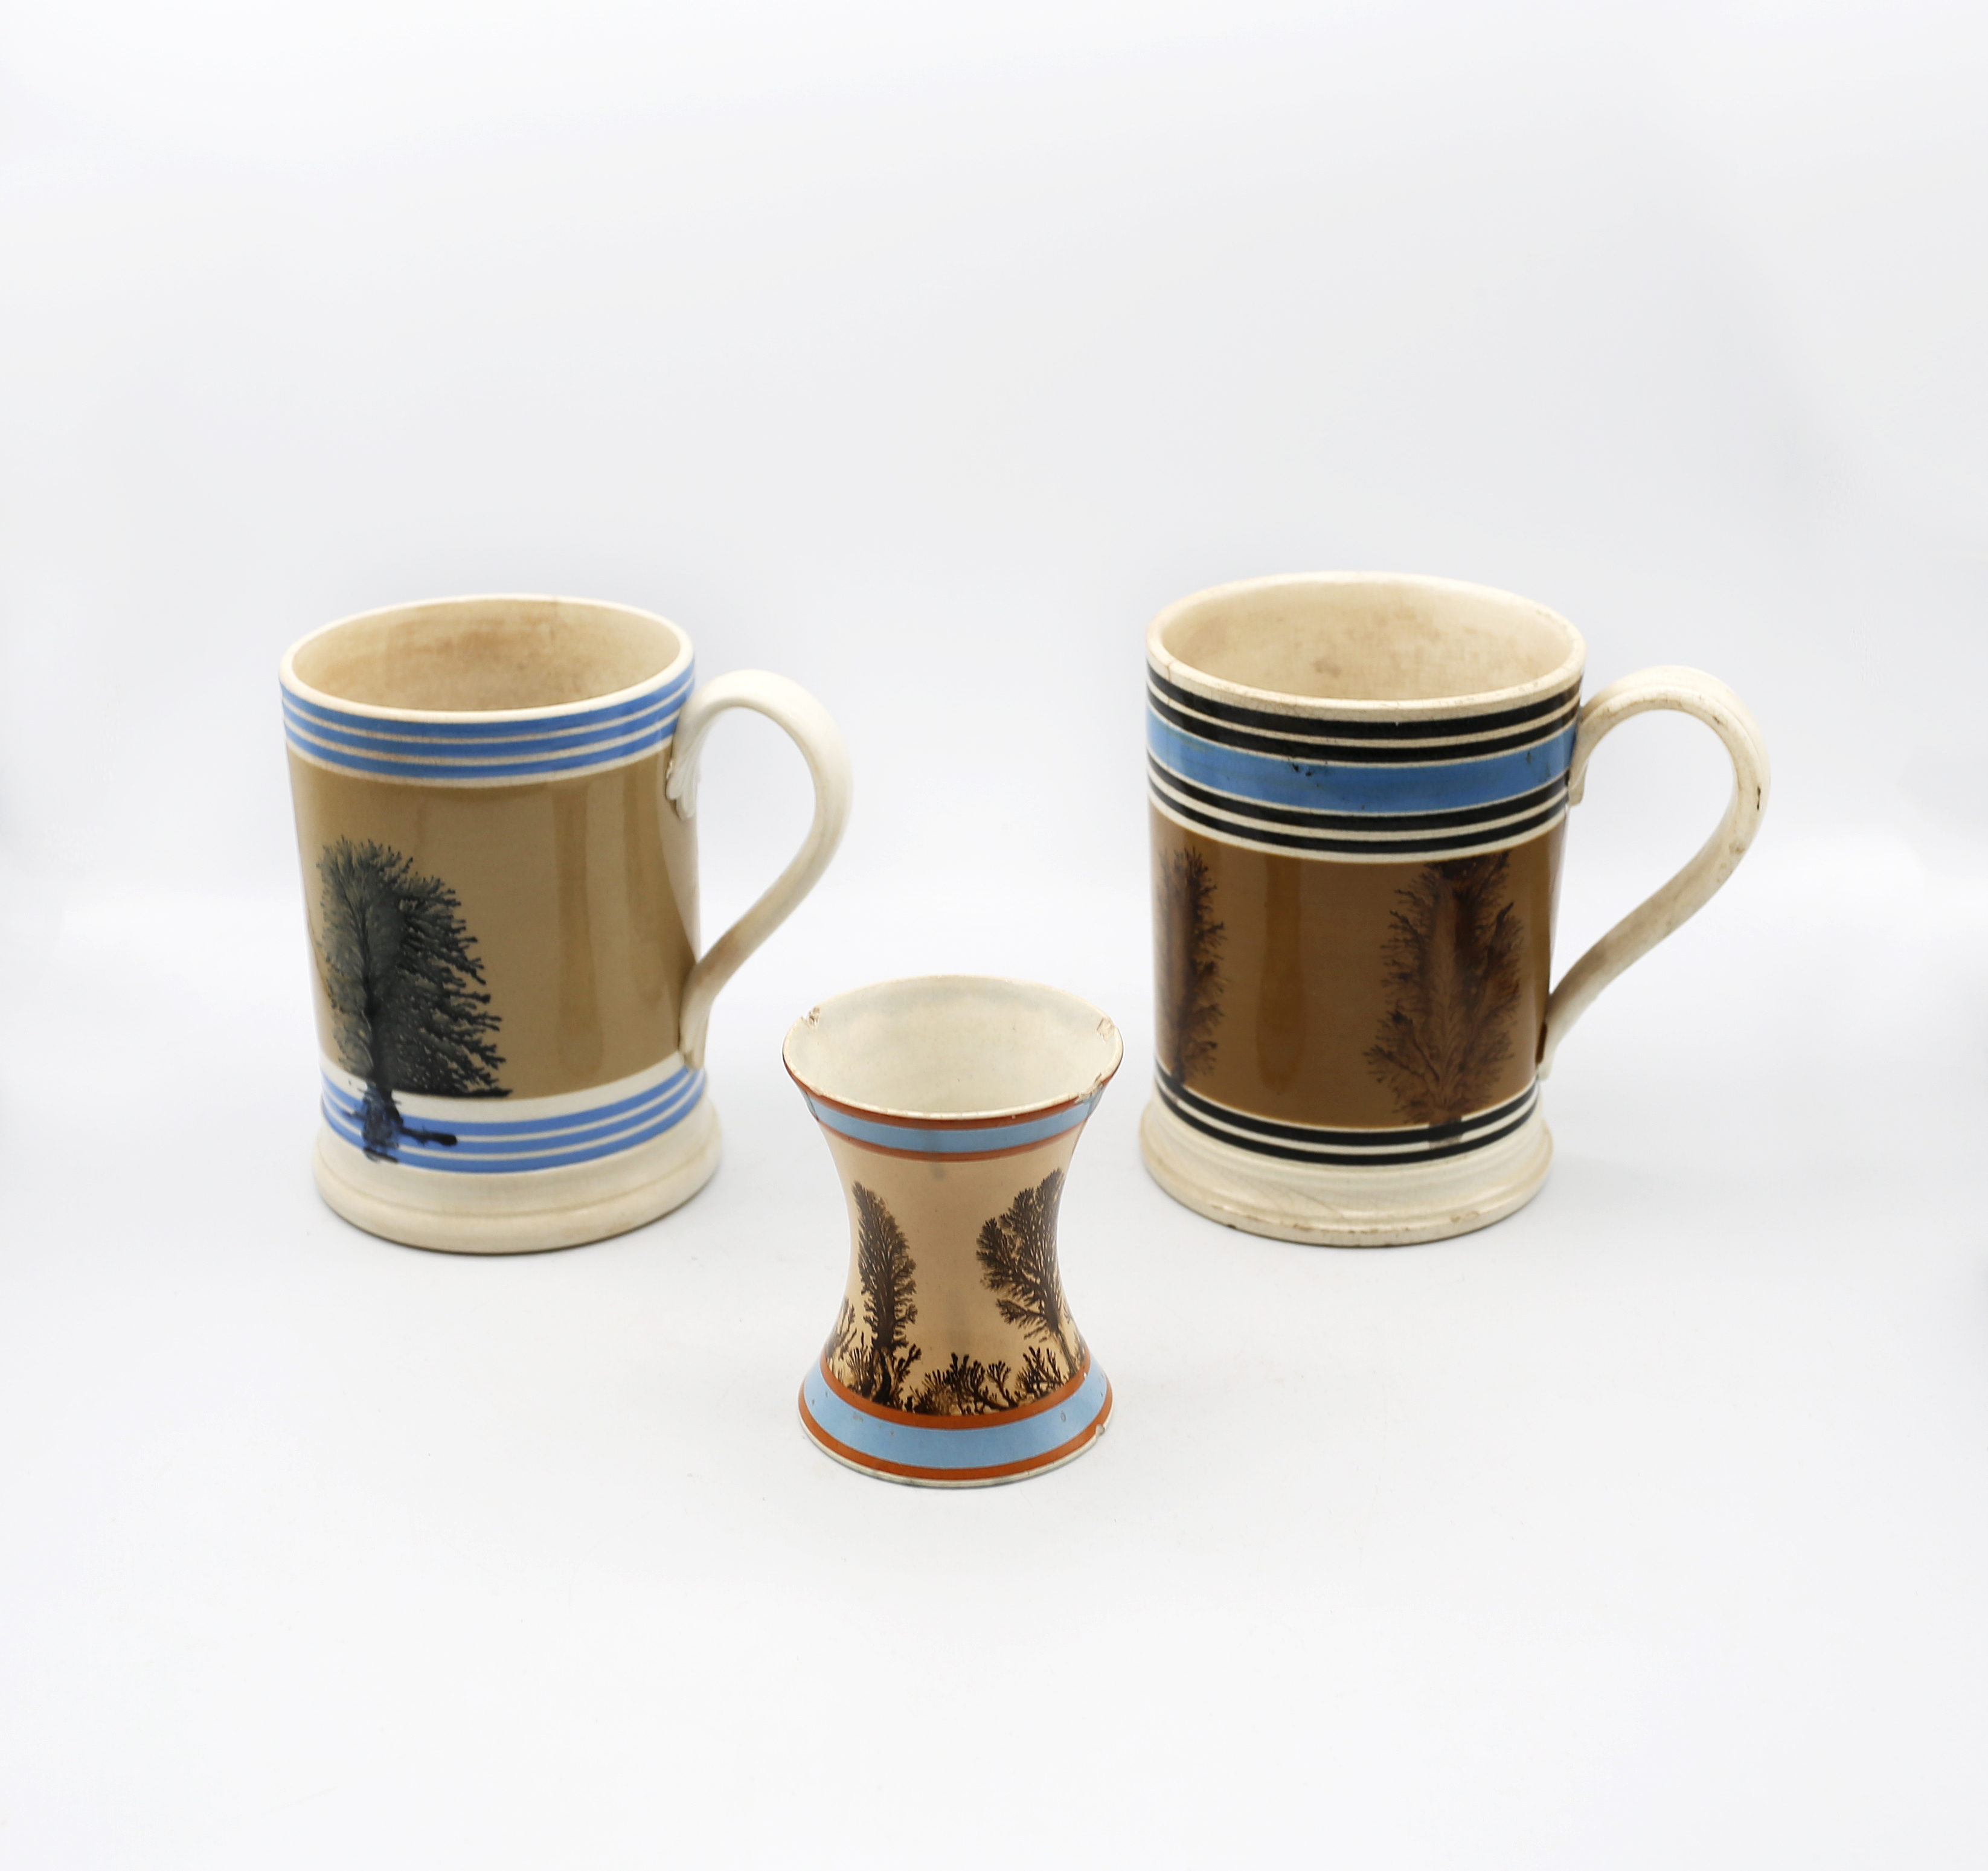 A Mocha ware Quart sized mug, mid brown ground with feathered sepia trees, blue band and six black